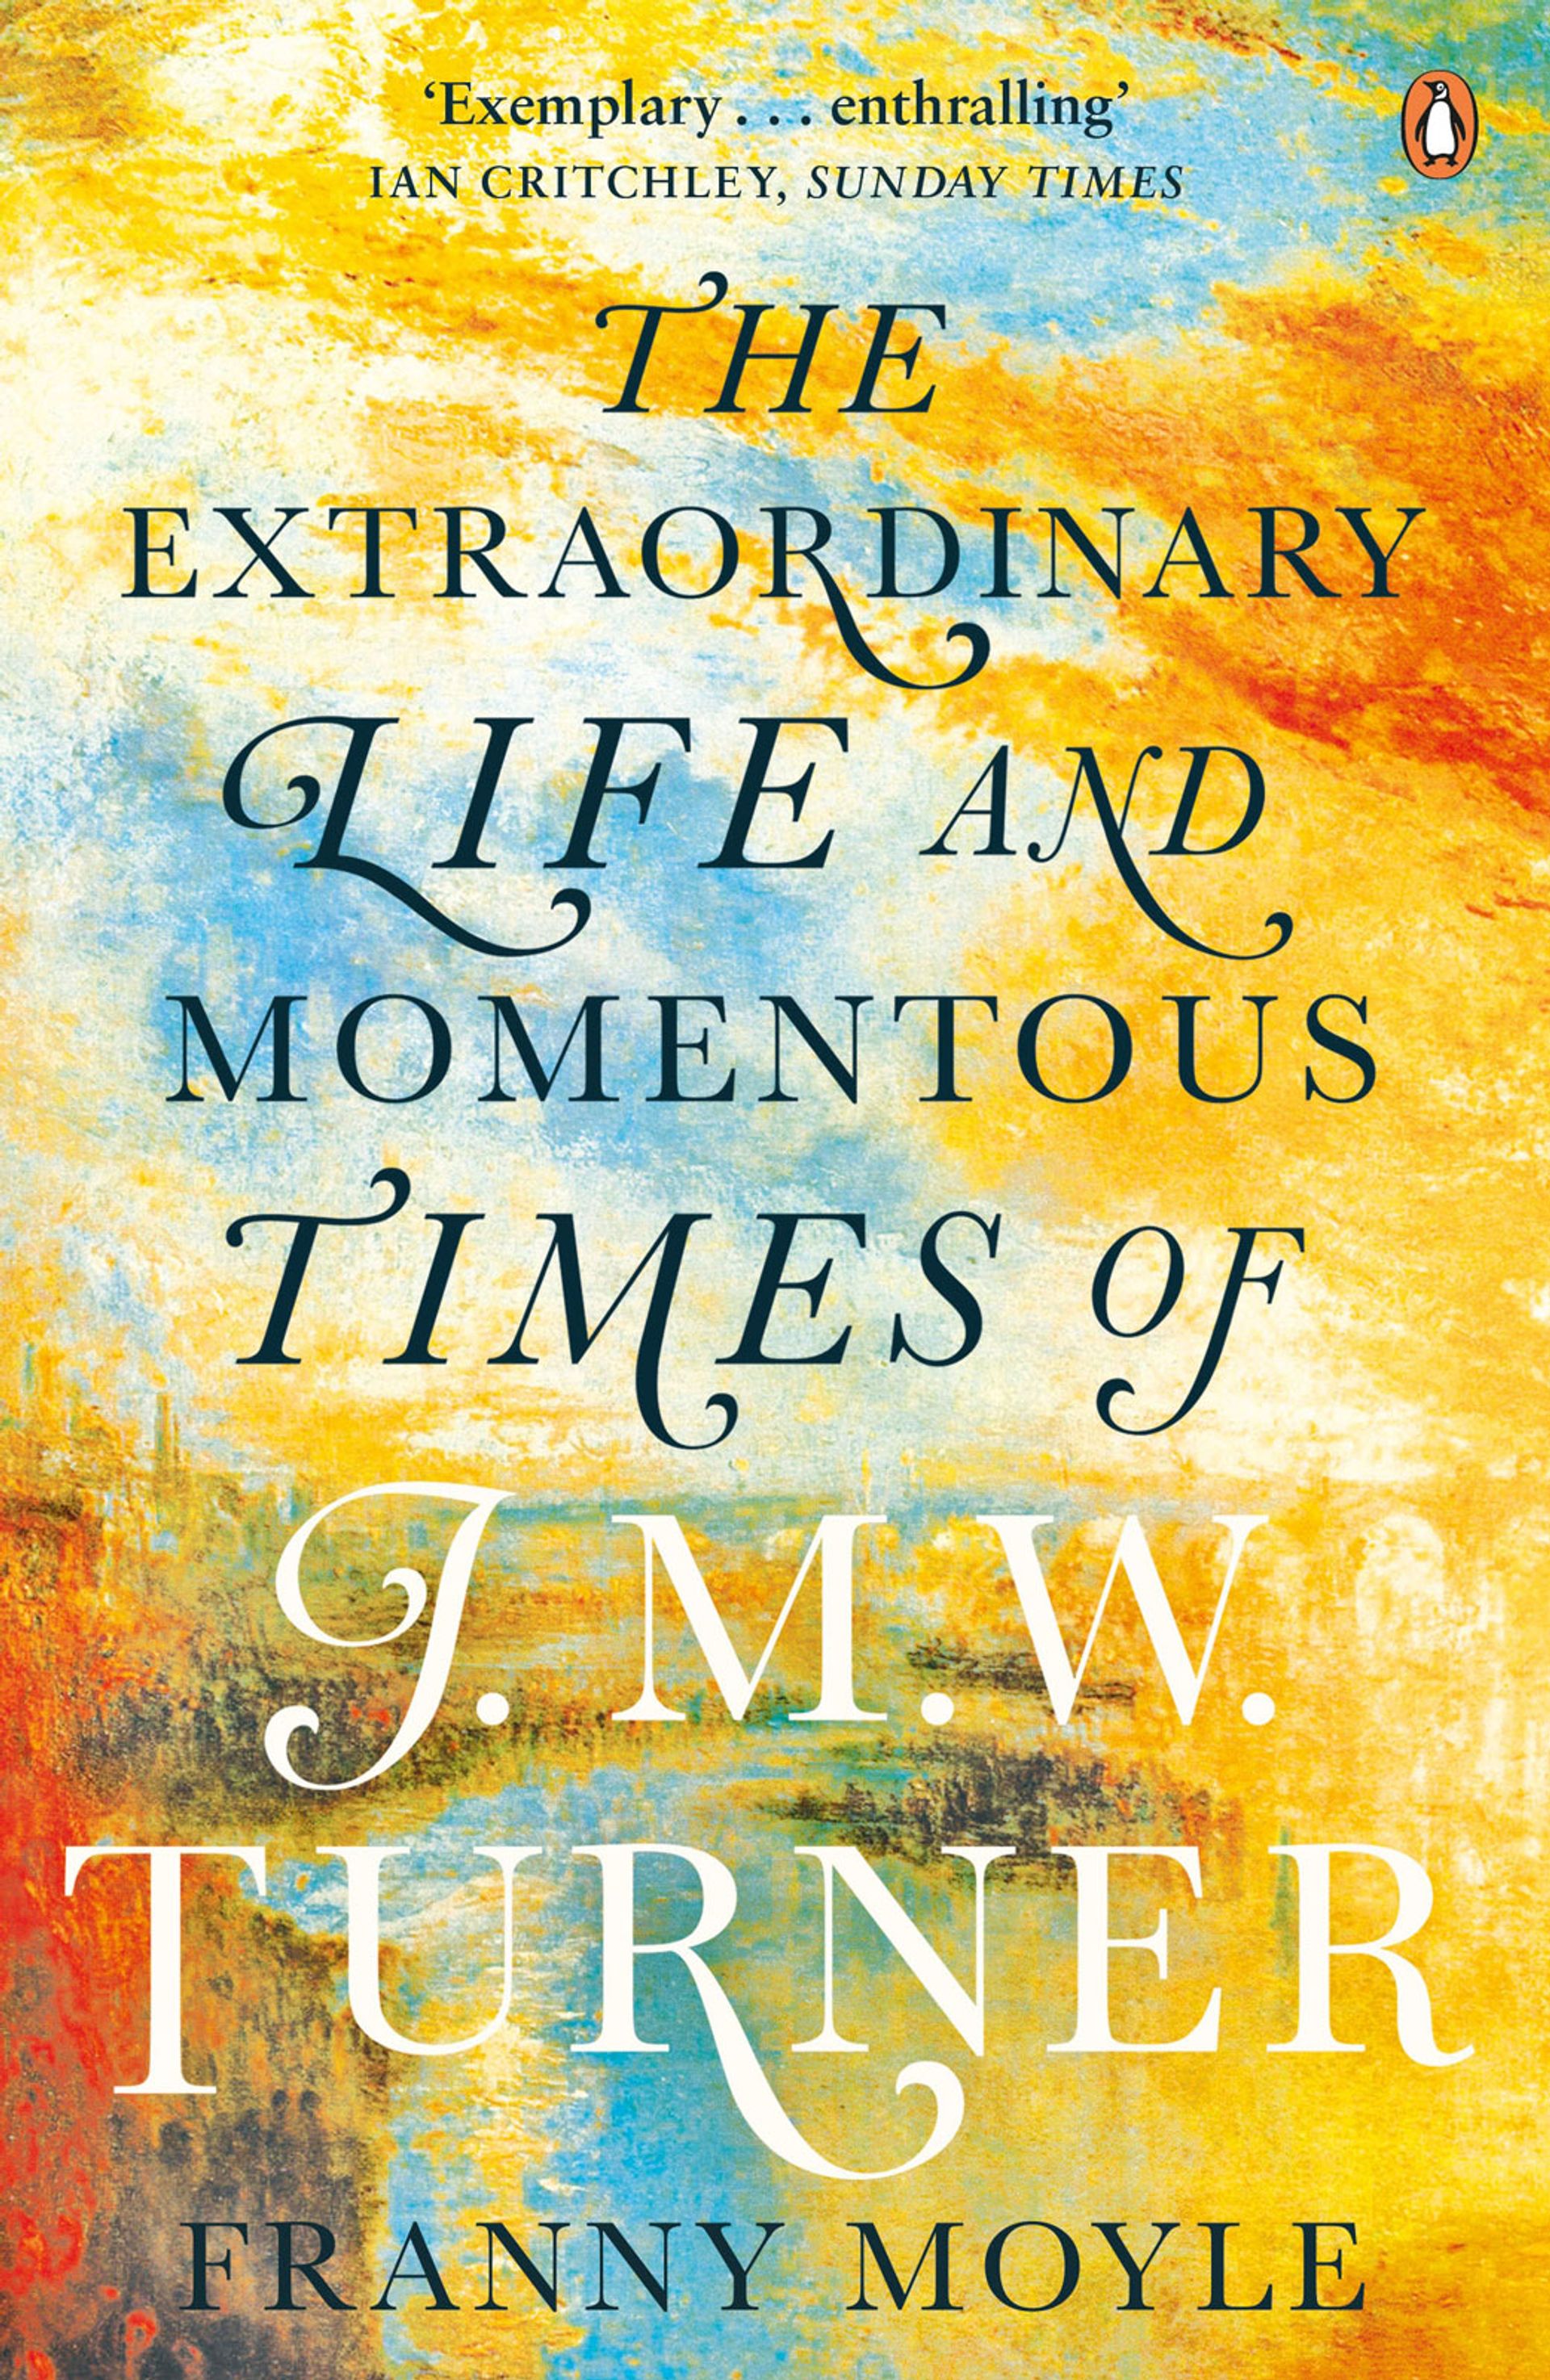 Turner Biography With All Details